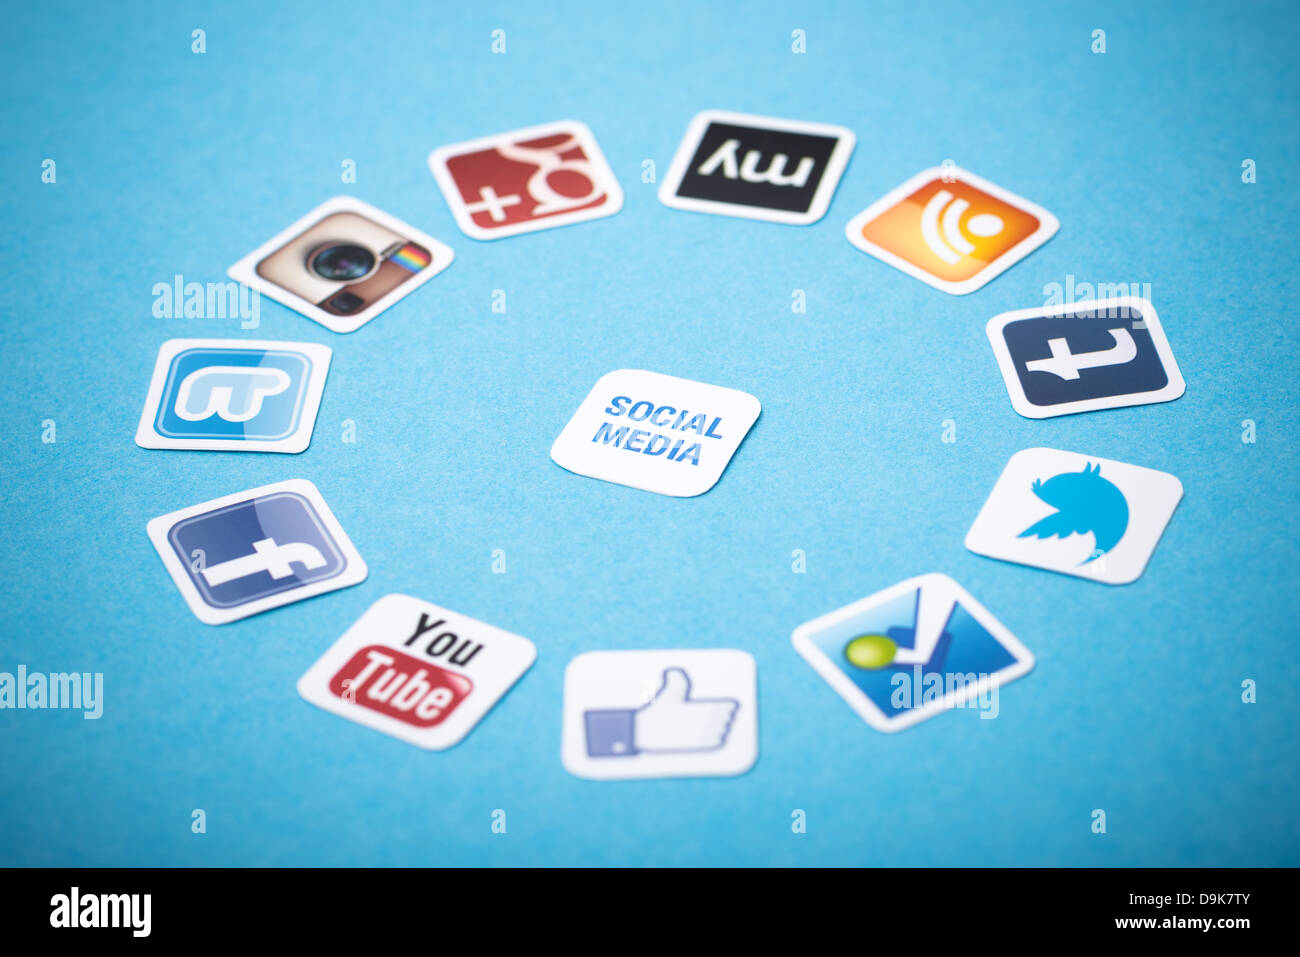 A logotype collection of well-known social media brands printed on paper and placed around on a blue background. Stock Photo